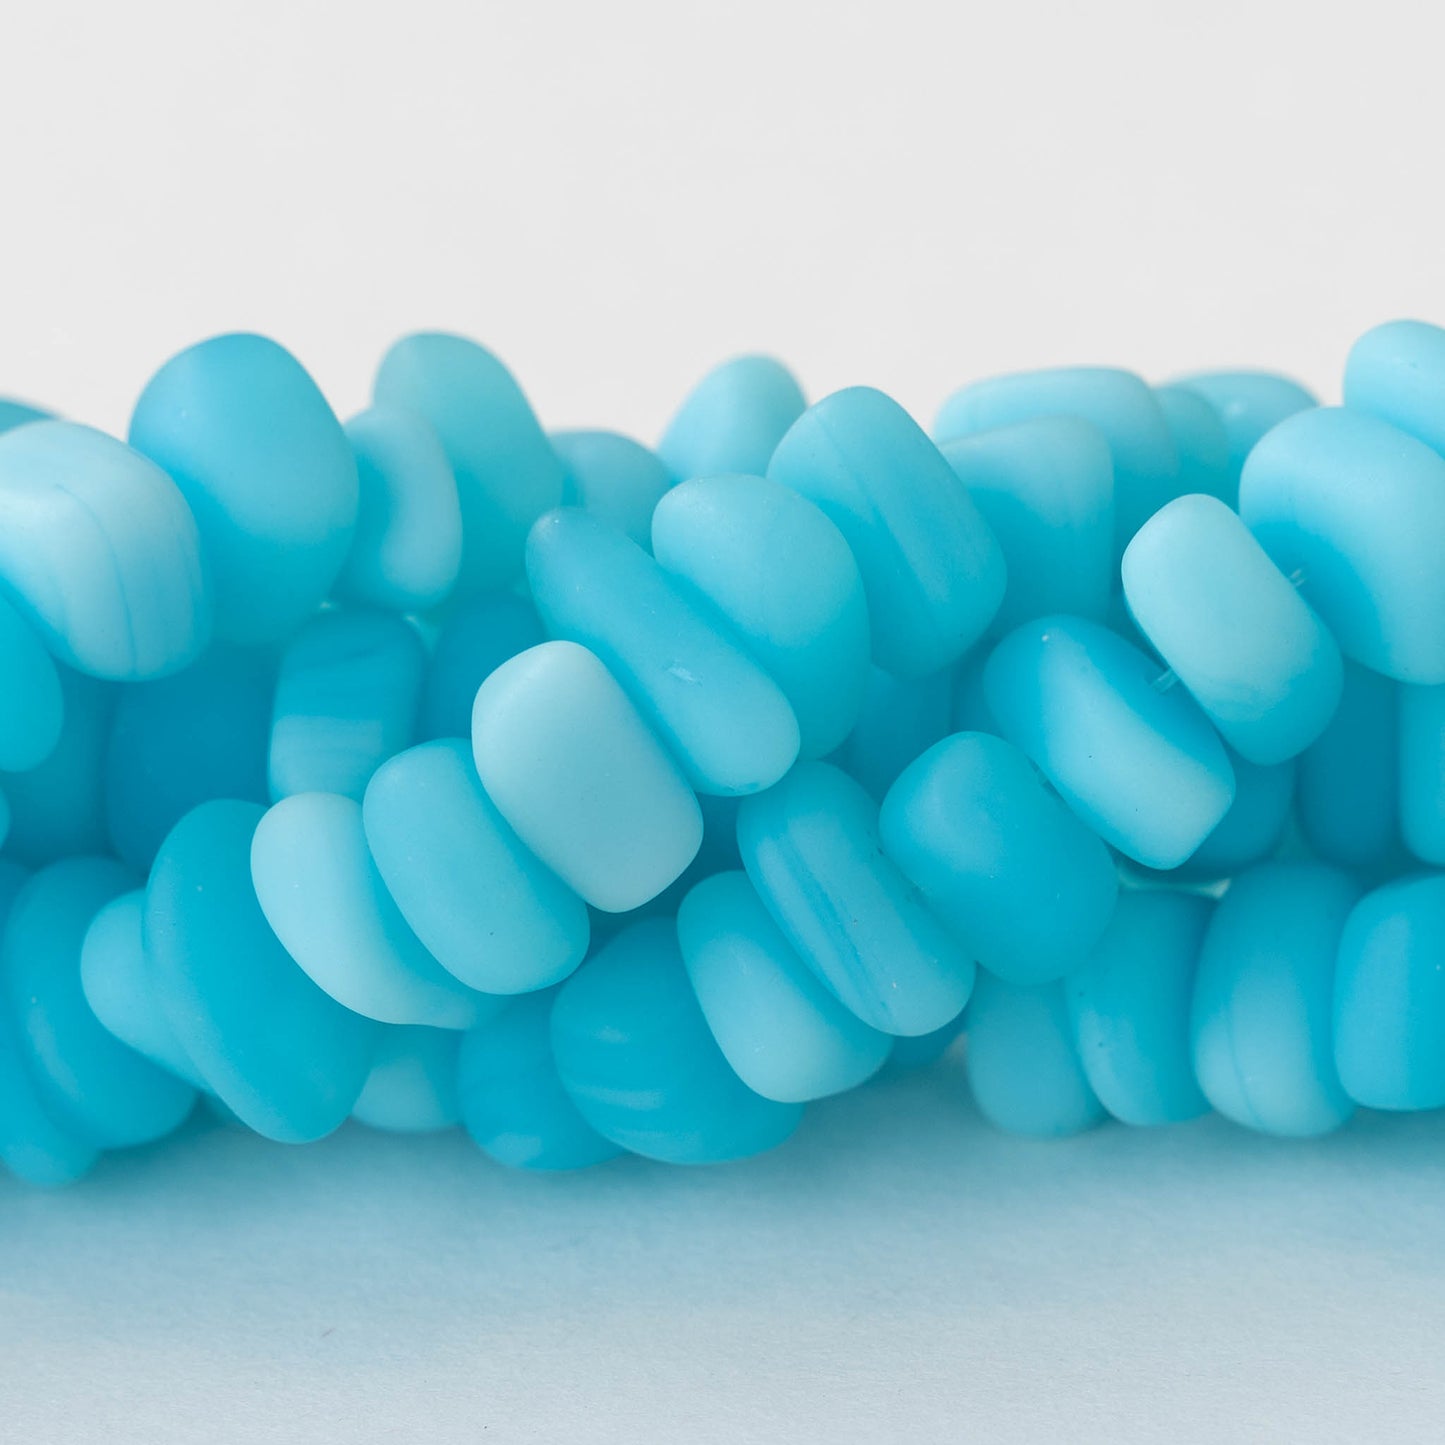 8-13mm Frosted Glass Pebbles - Opaque Light Aqua - 50 Beads